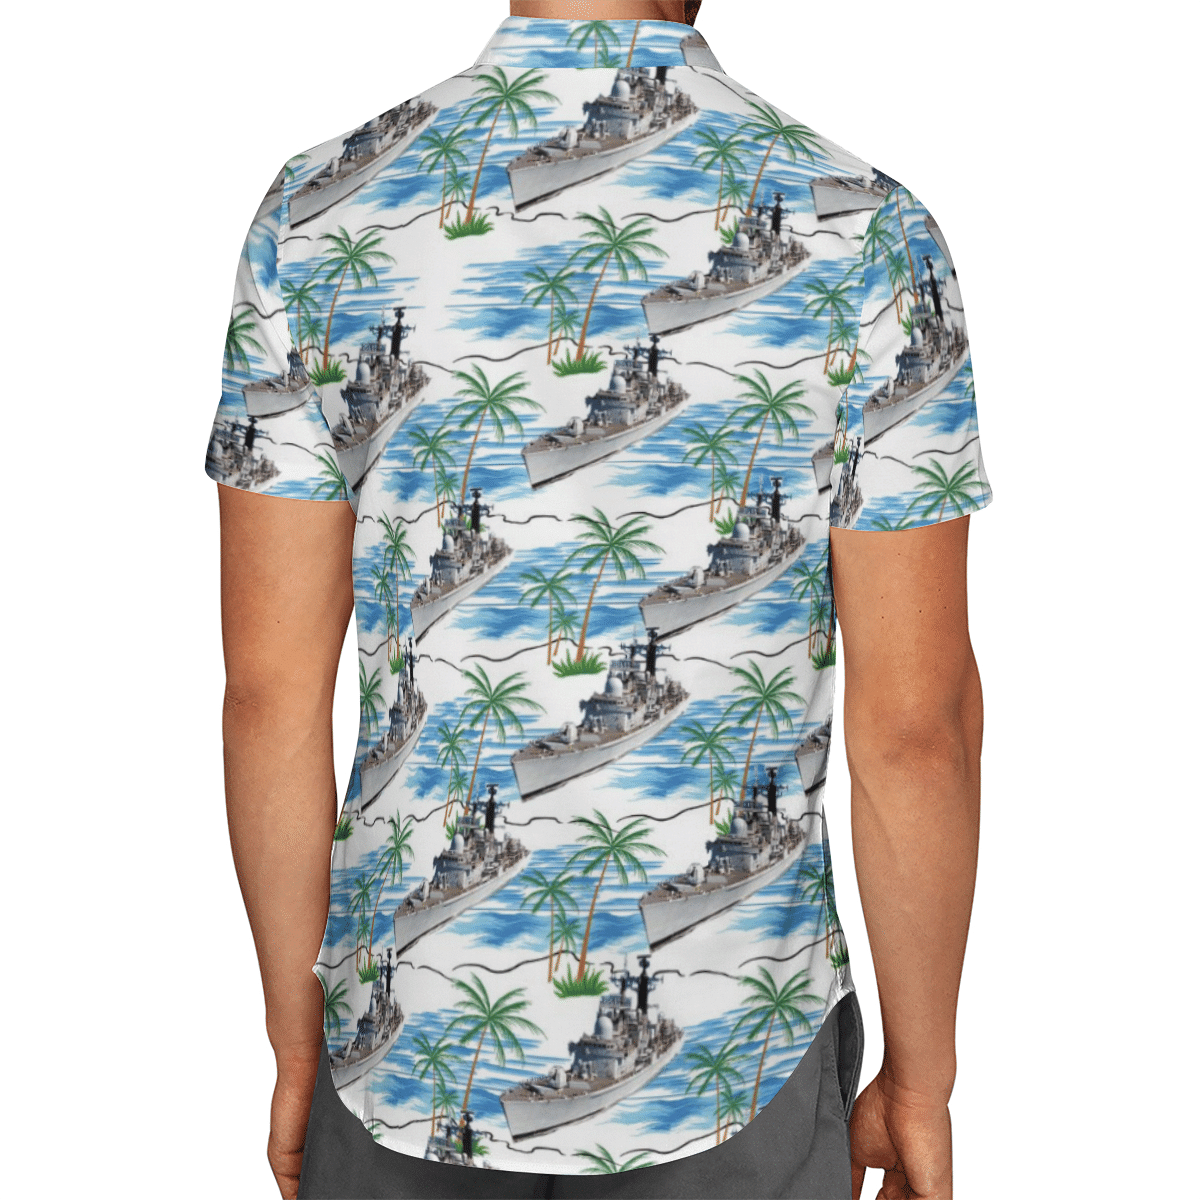 Going to the beach with a quality shirt 149